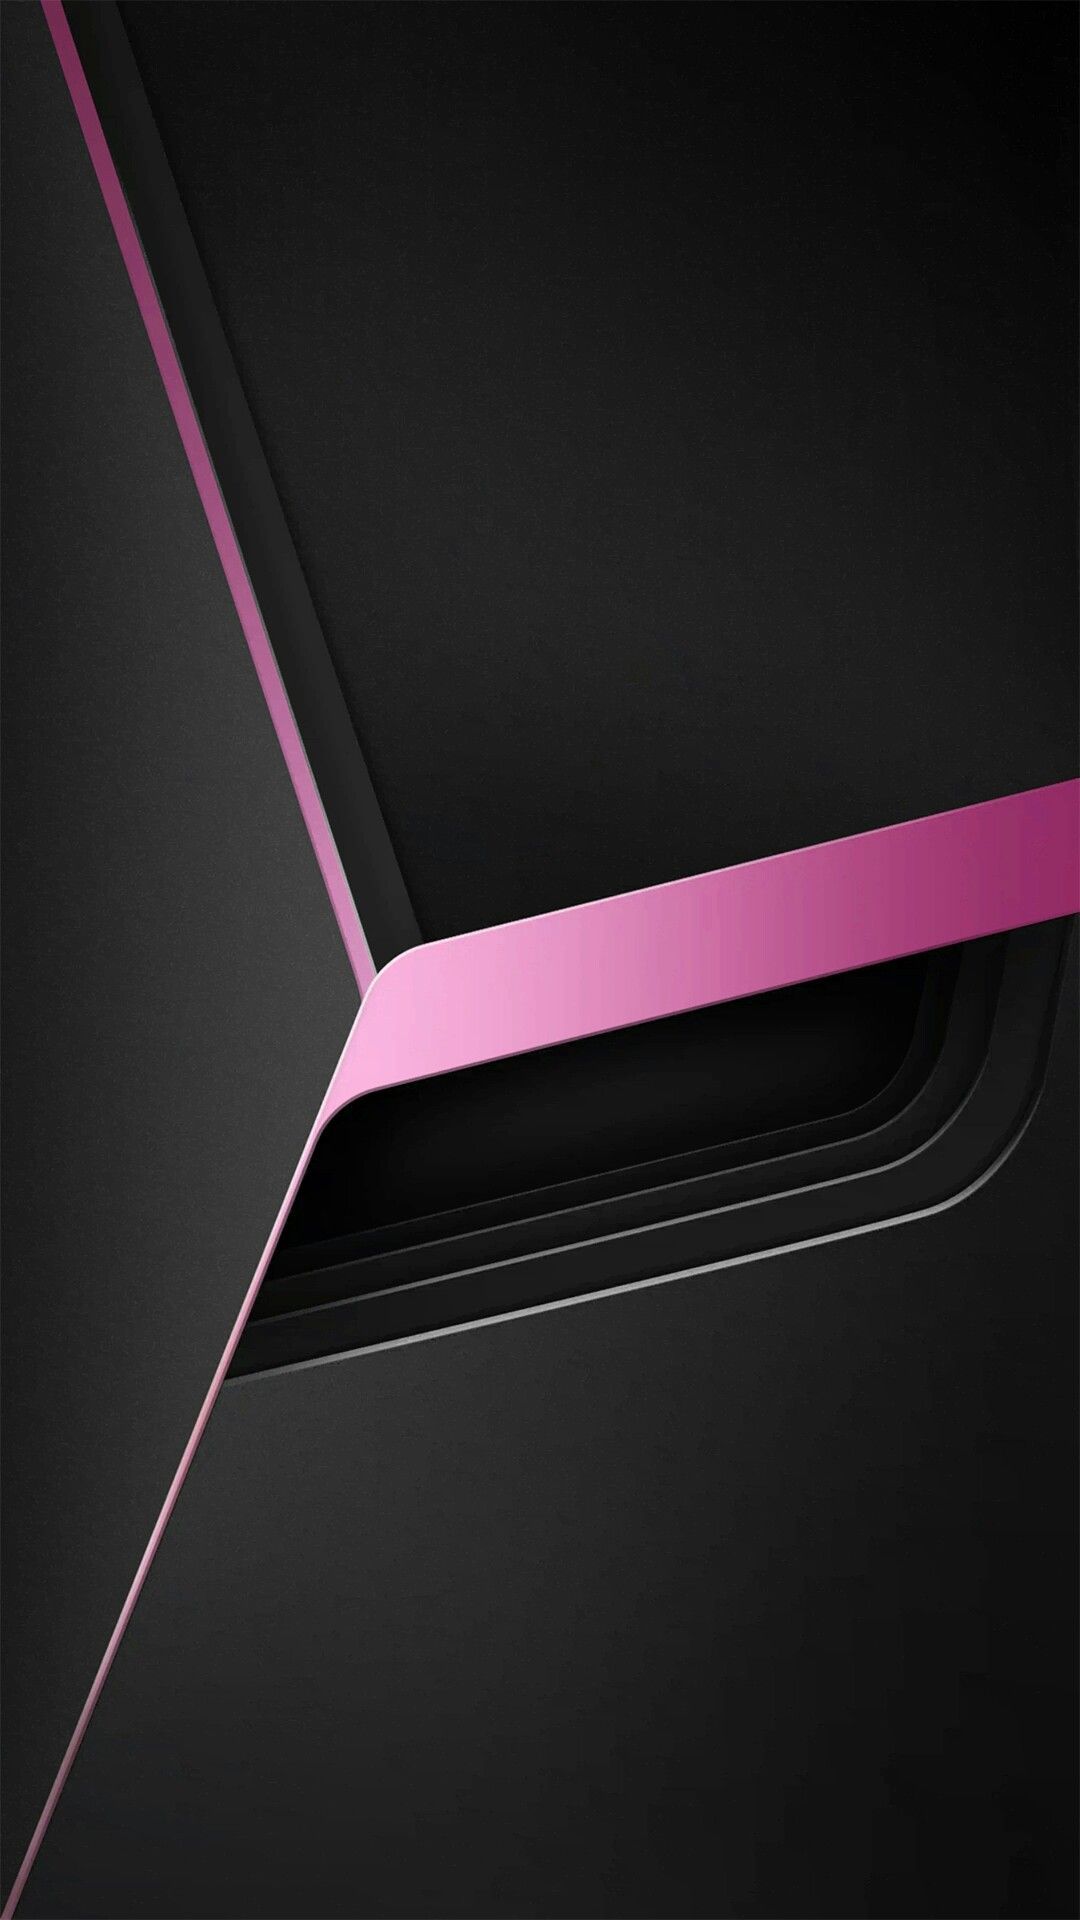 Aesthetic Black And Pink Wallpapers - Wallpaper Cave